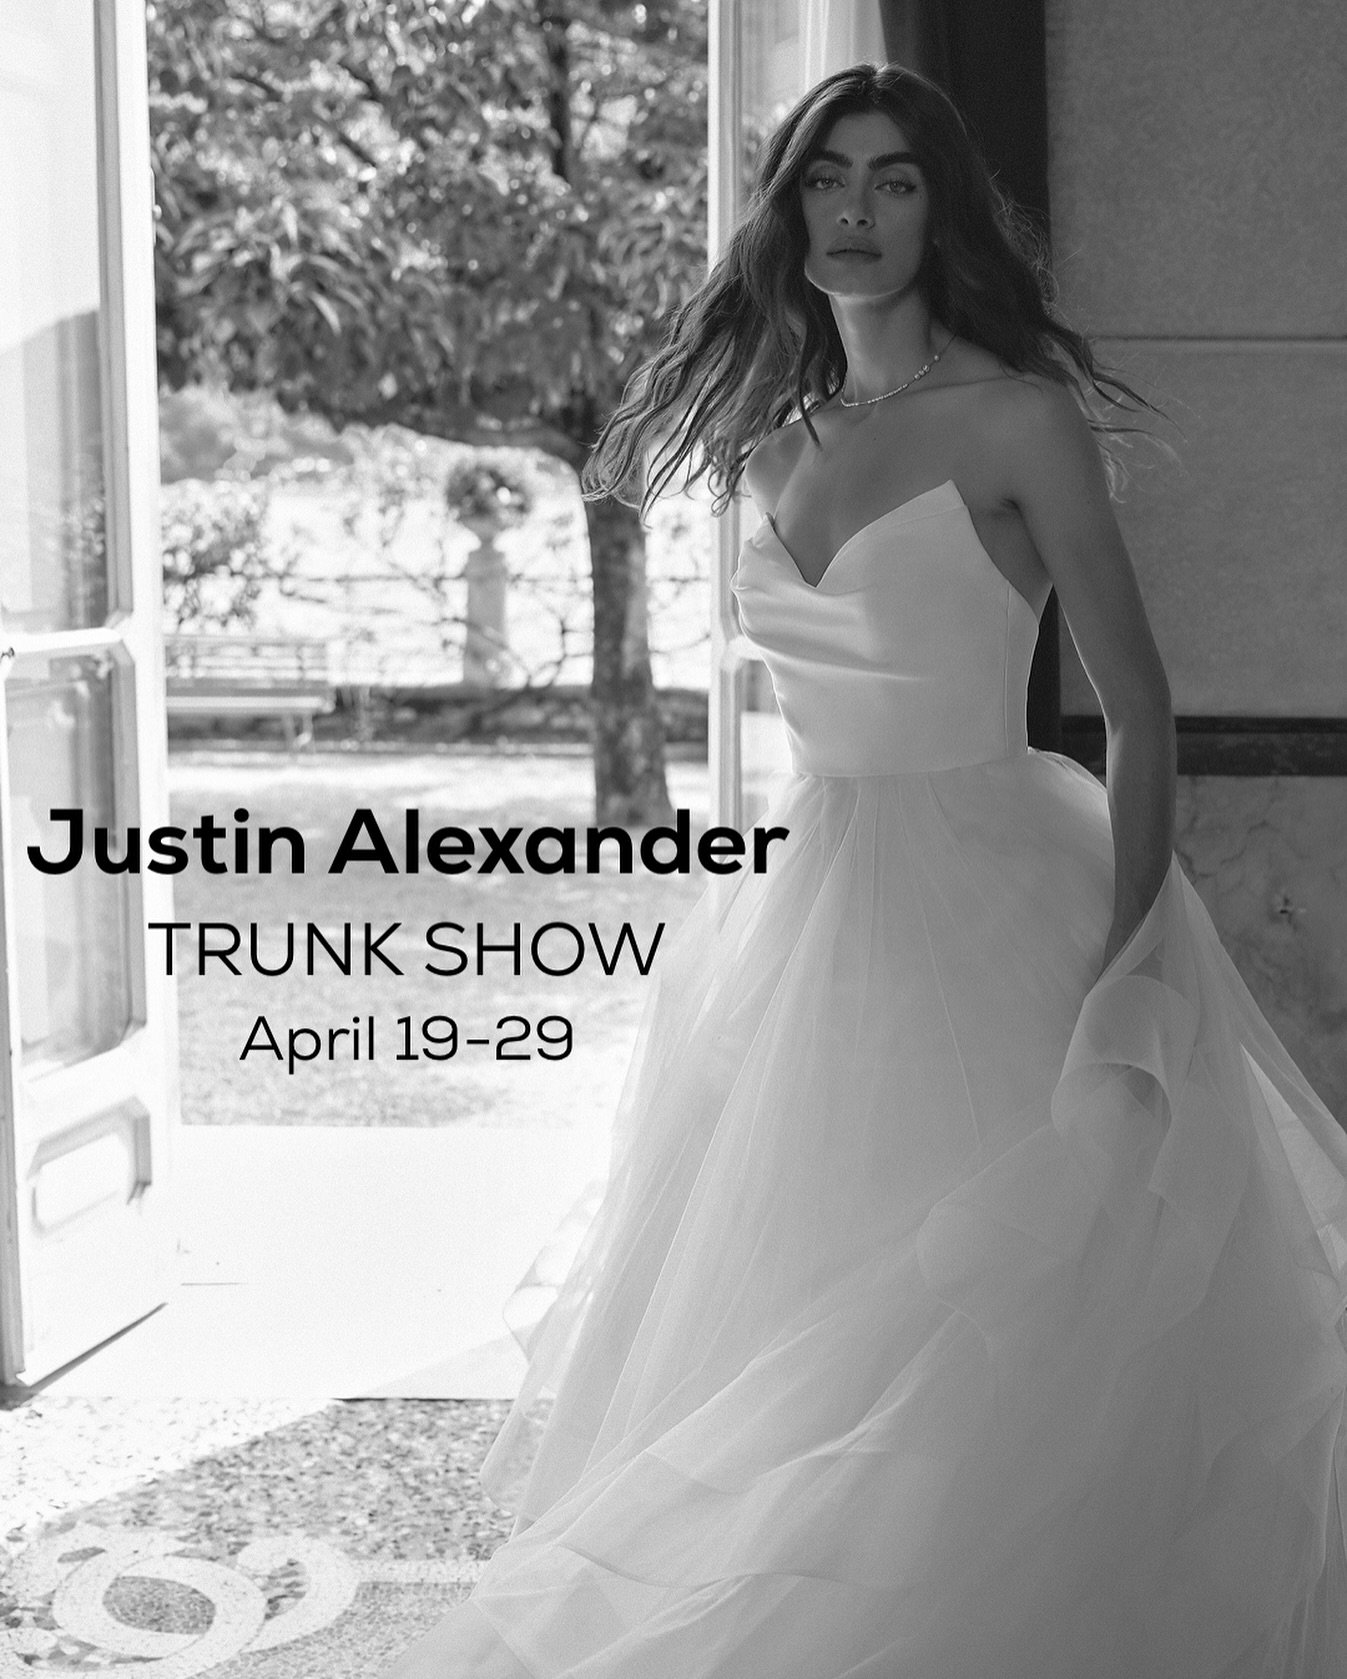 Find your style at our Justin Alexander trunk show. Visit us until April 28th and receive an exclusive 10% off your bridal gown. At Chantilly Lace, we celebrate the cool, modern bride. The easiest &lsquo;yes&rsquo; you&rsquo;ll say before the aisle.
